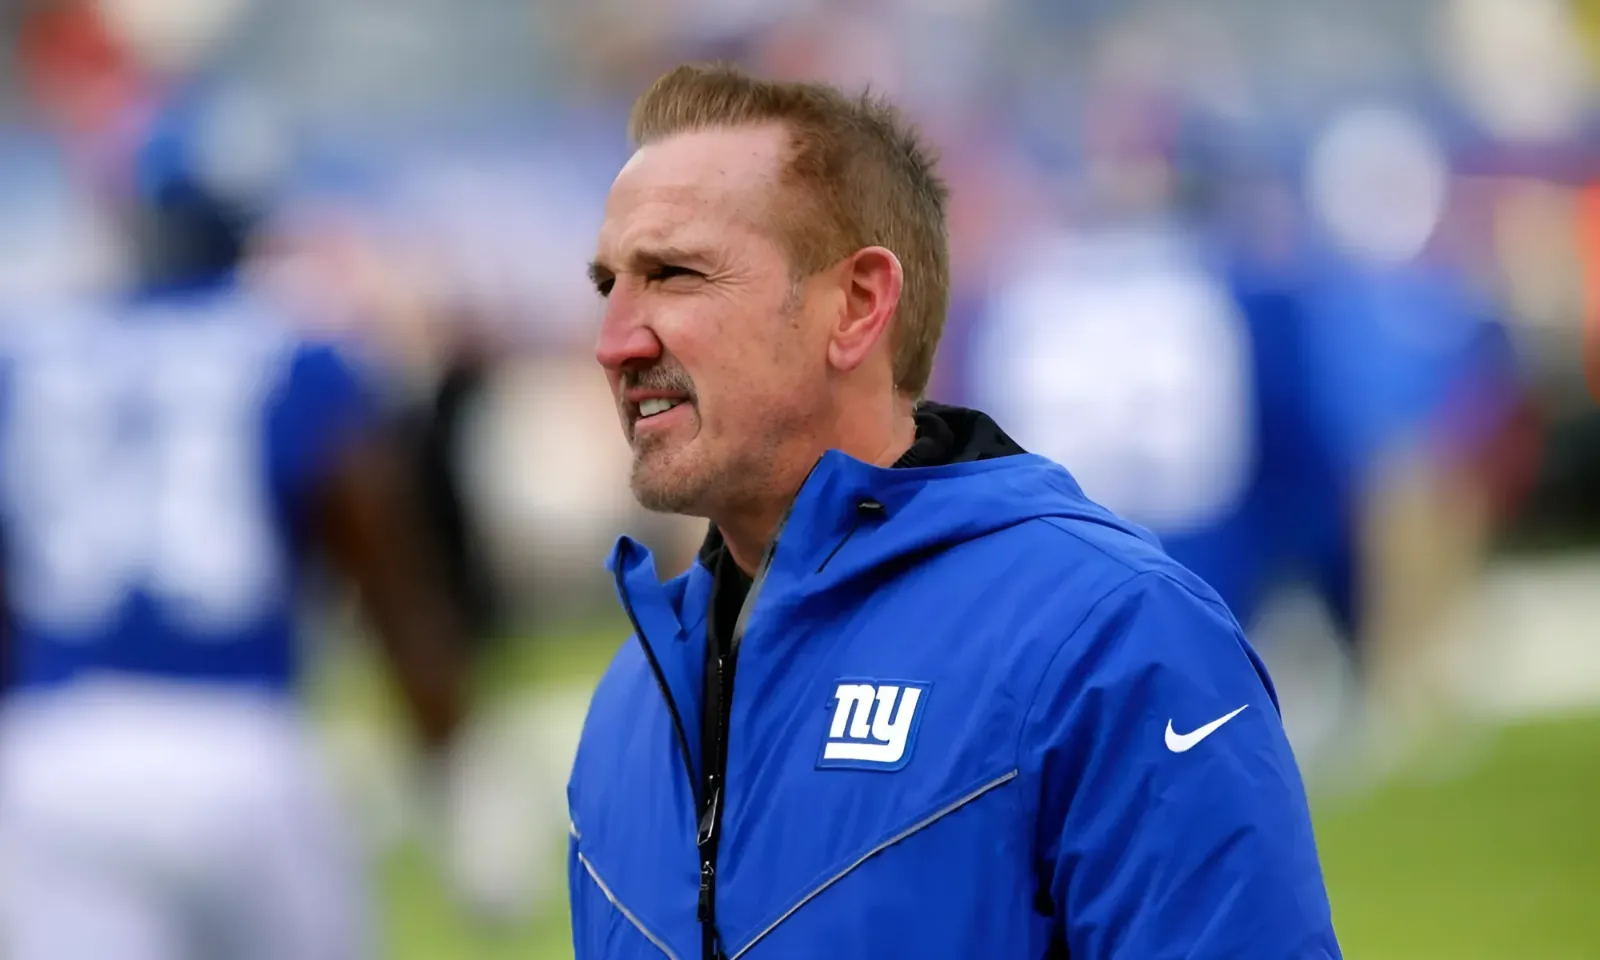 Steve Spagnuolo is using his past to warn the Chiefs’ defense to avoid complacency